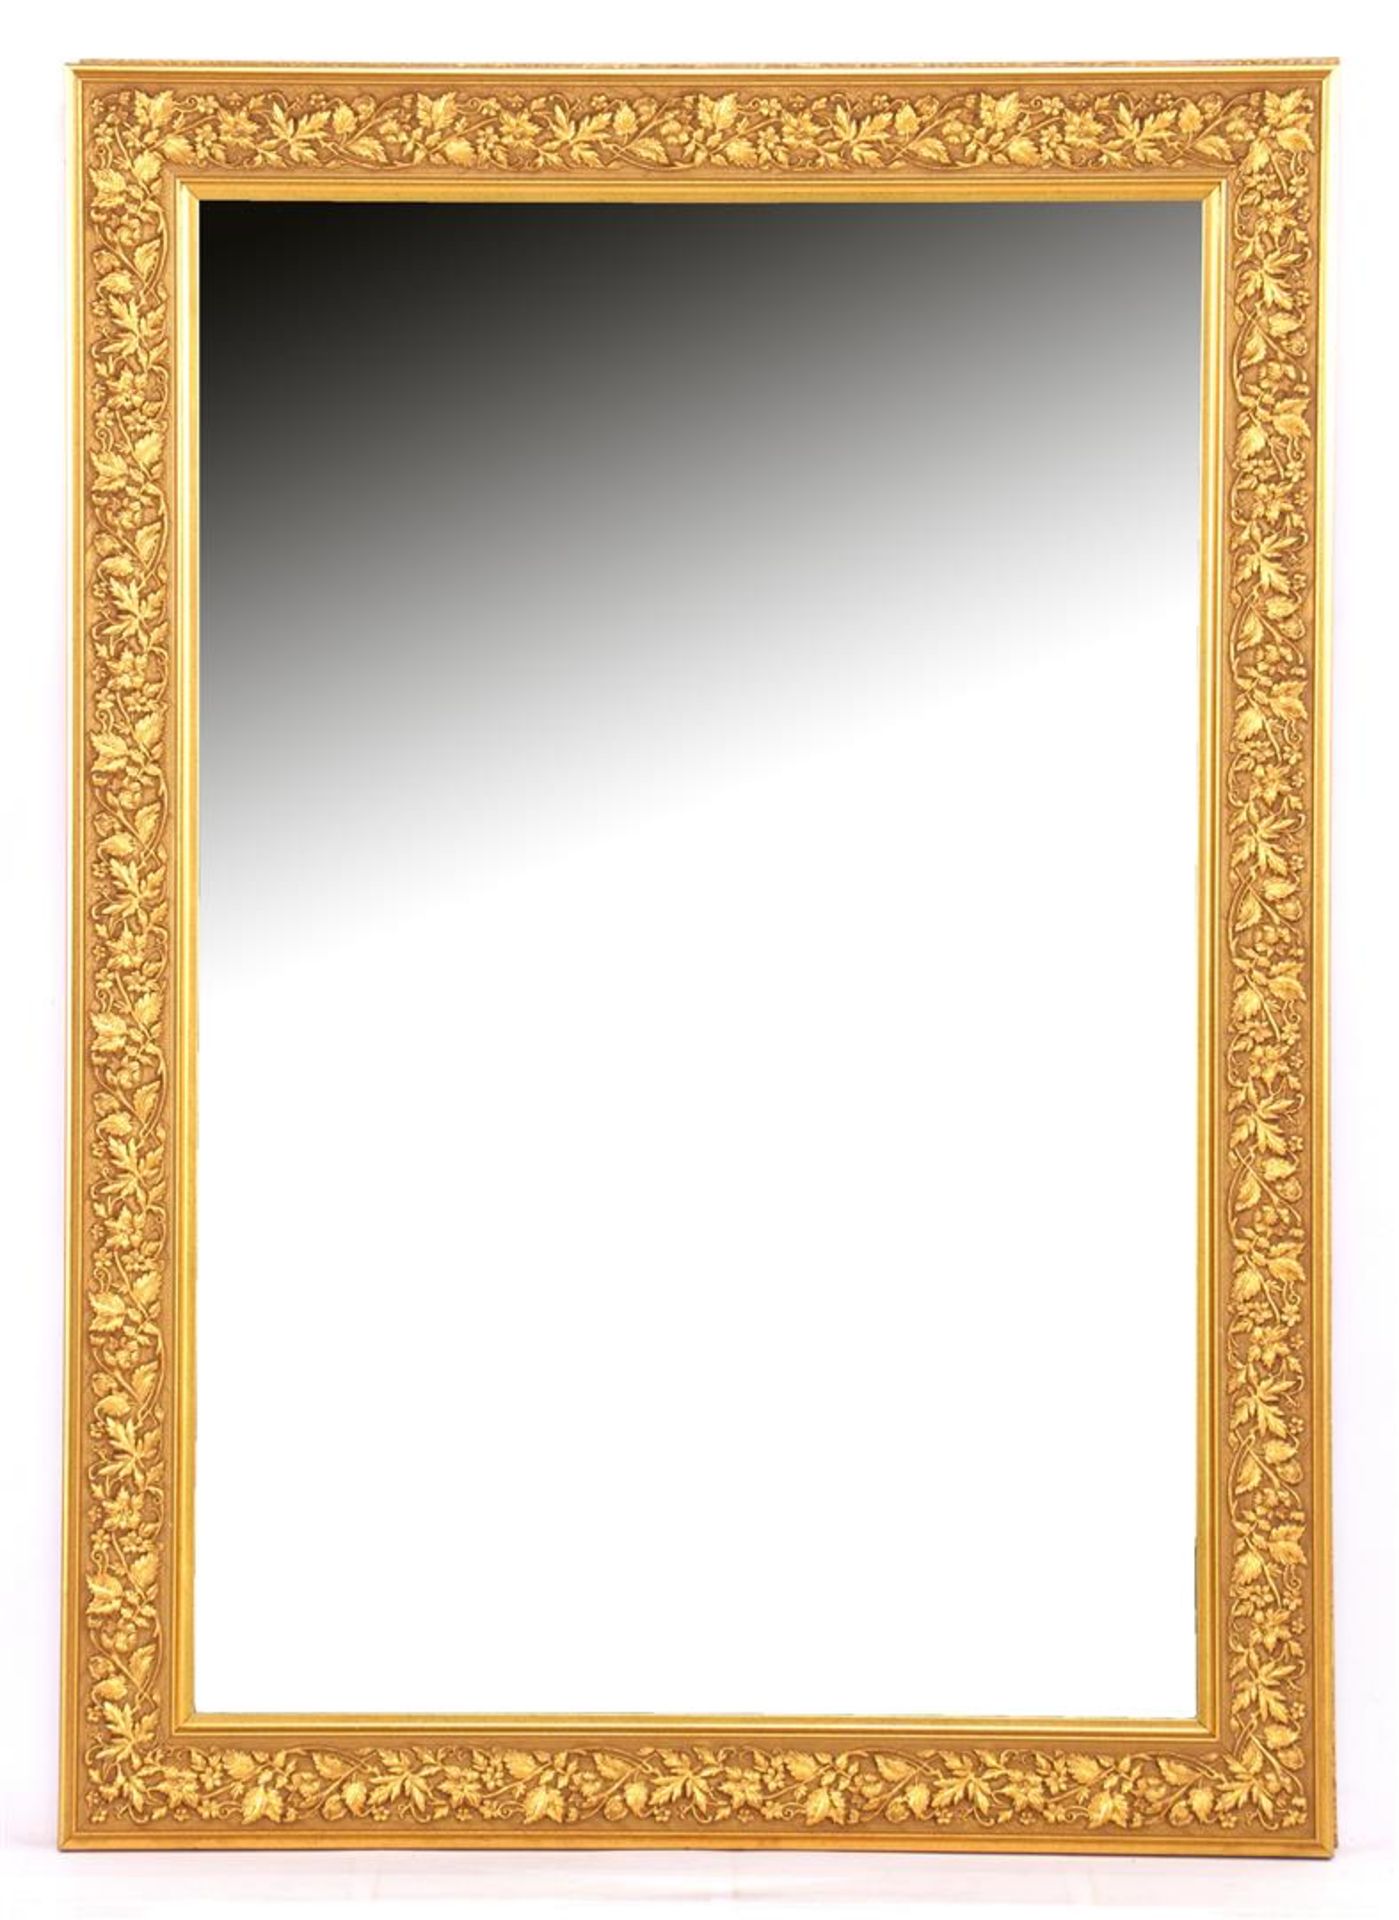 Faceted mirror in gold-colored edited frame